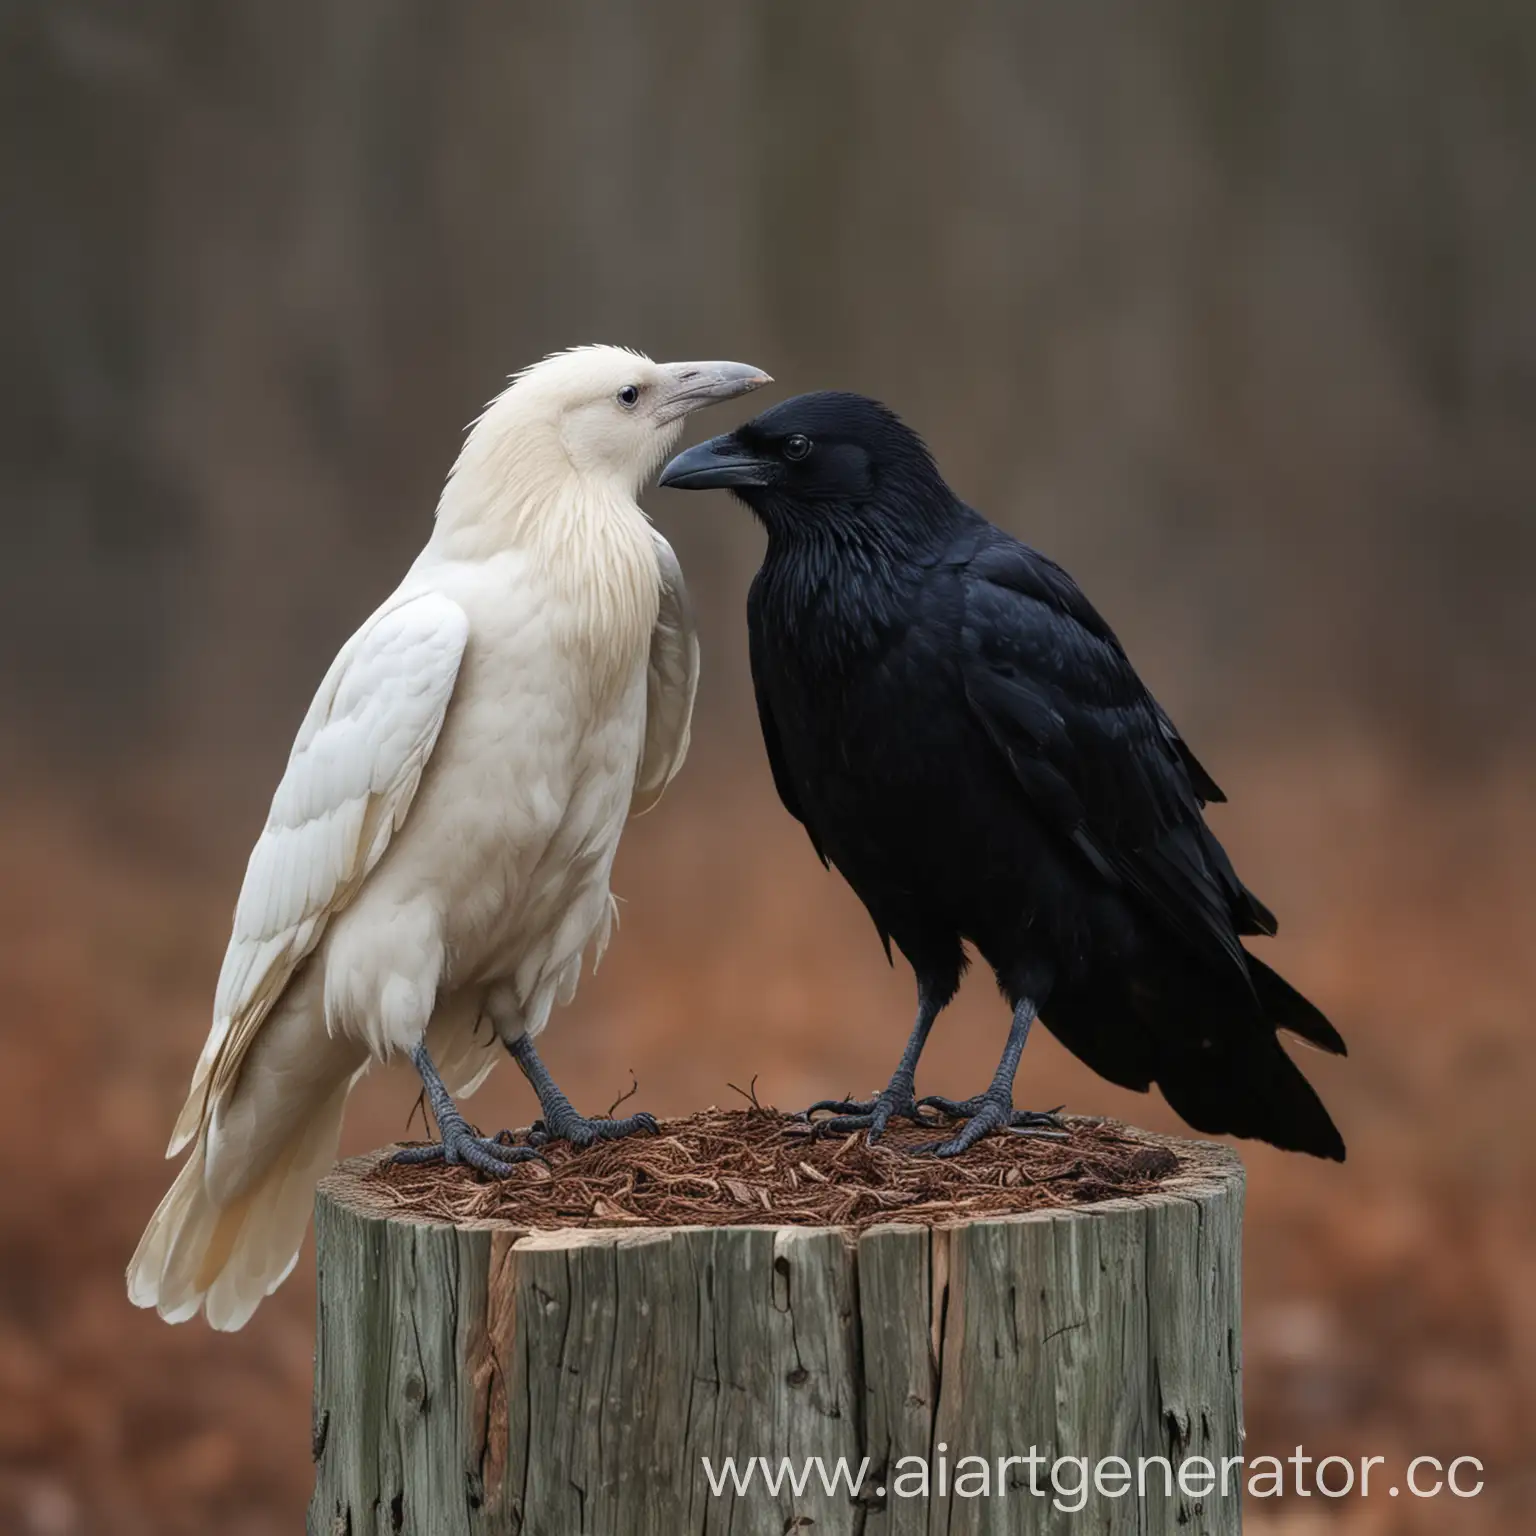 Contrasting-Beauty-Black-and-Albino-Crows-Perched-Side-by-Side